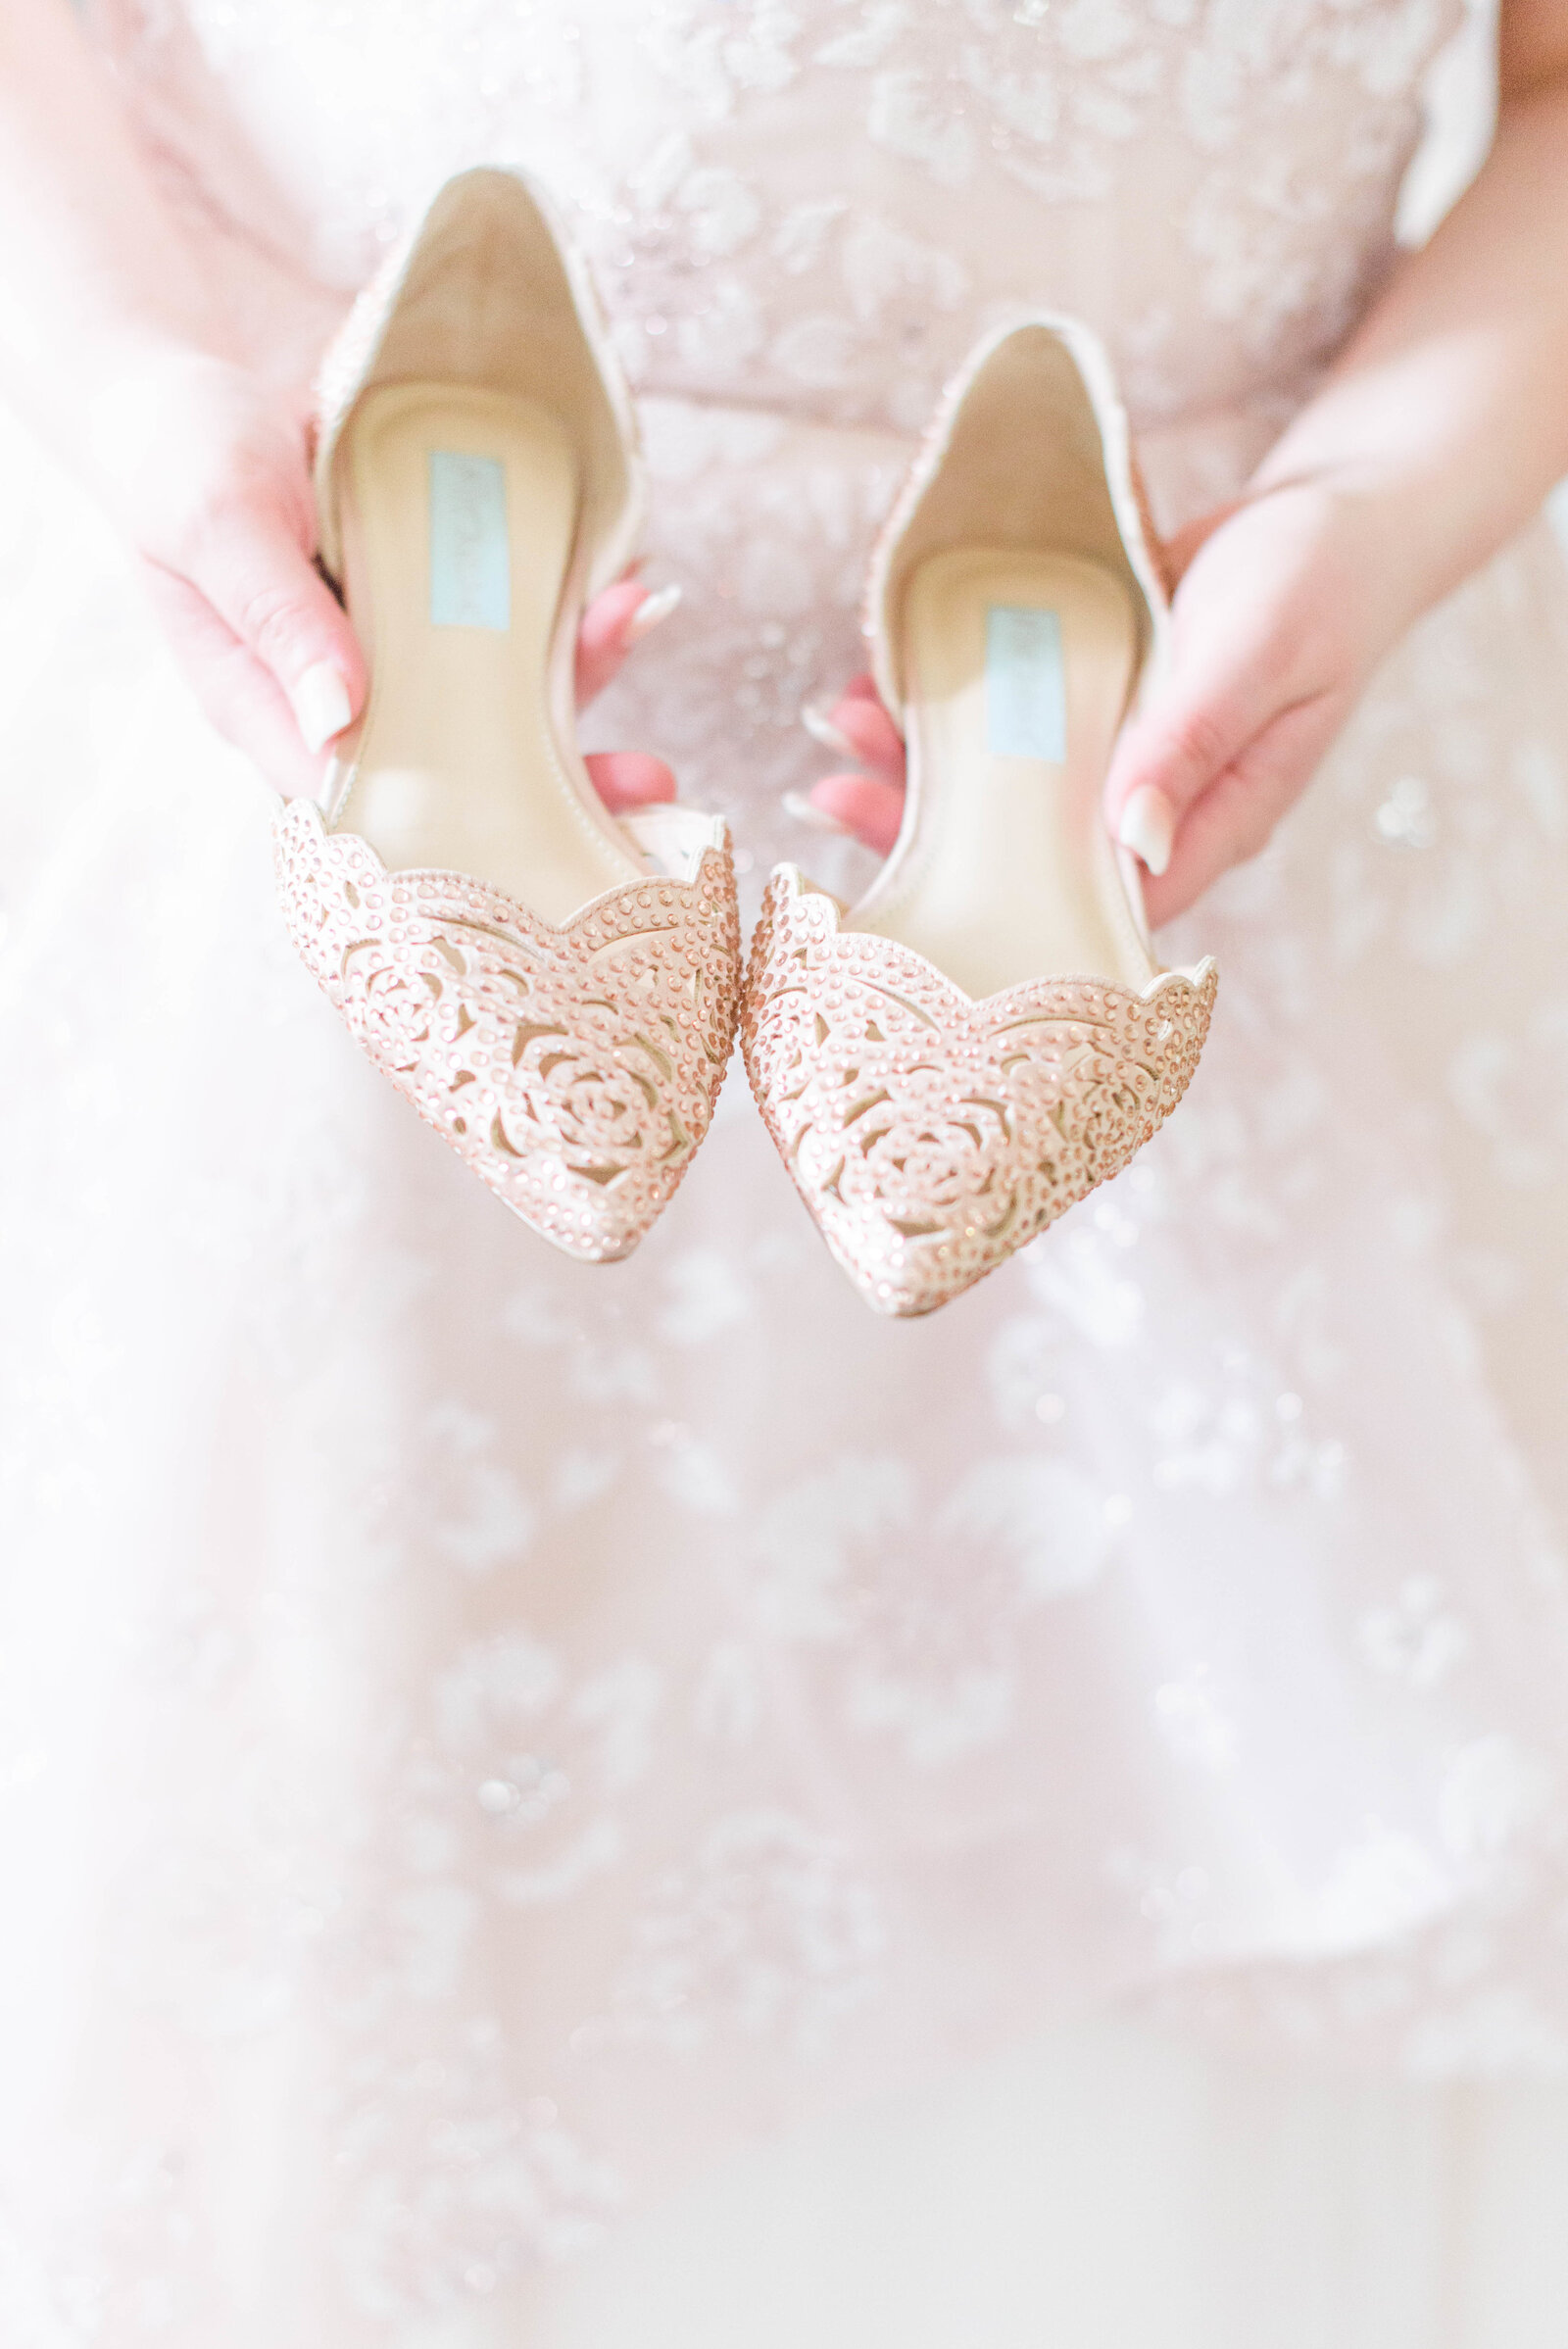 Bride holds blush shoes in front of blush wedding dress on wedding day photographed by Cait Kramer Photography